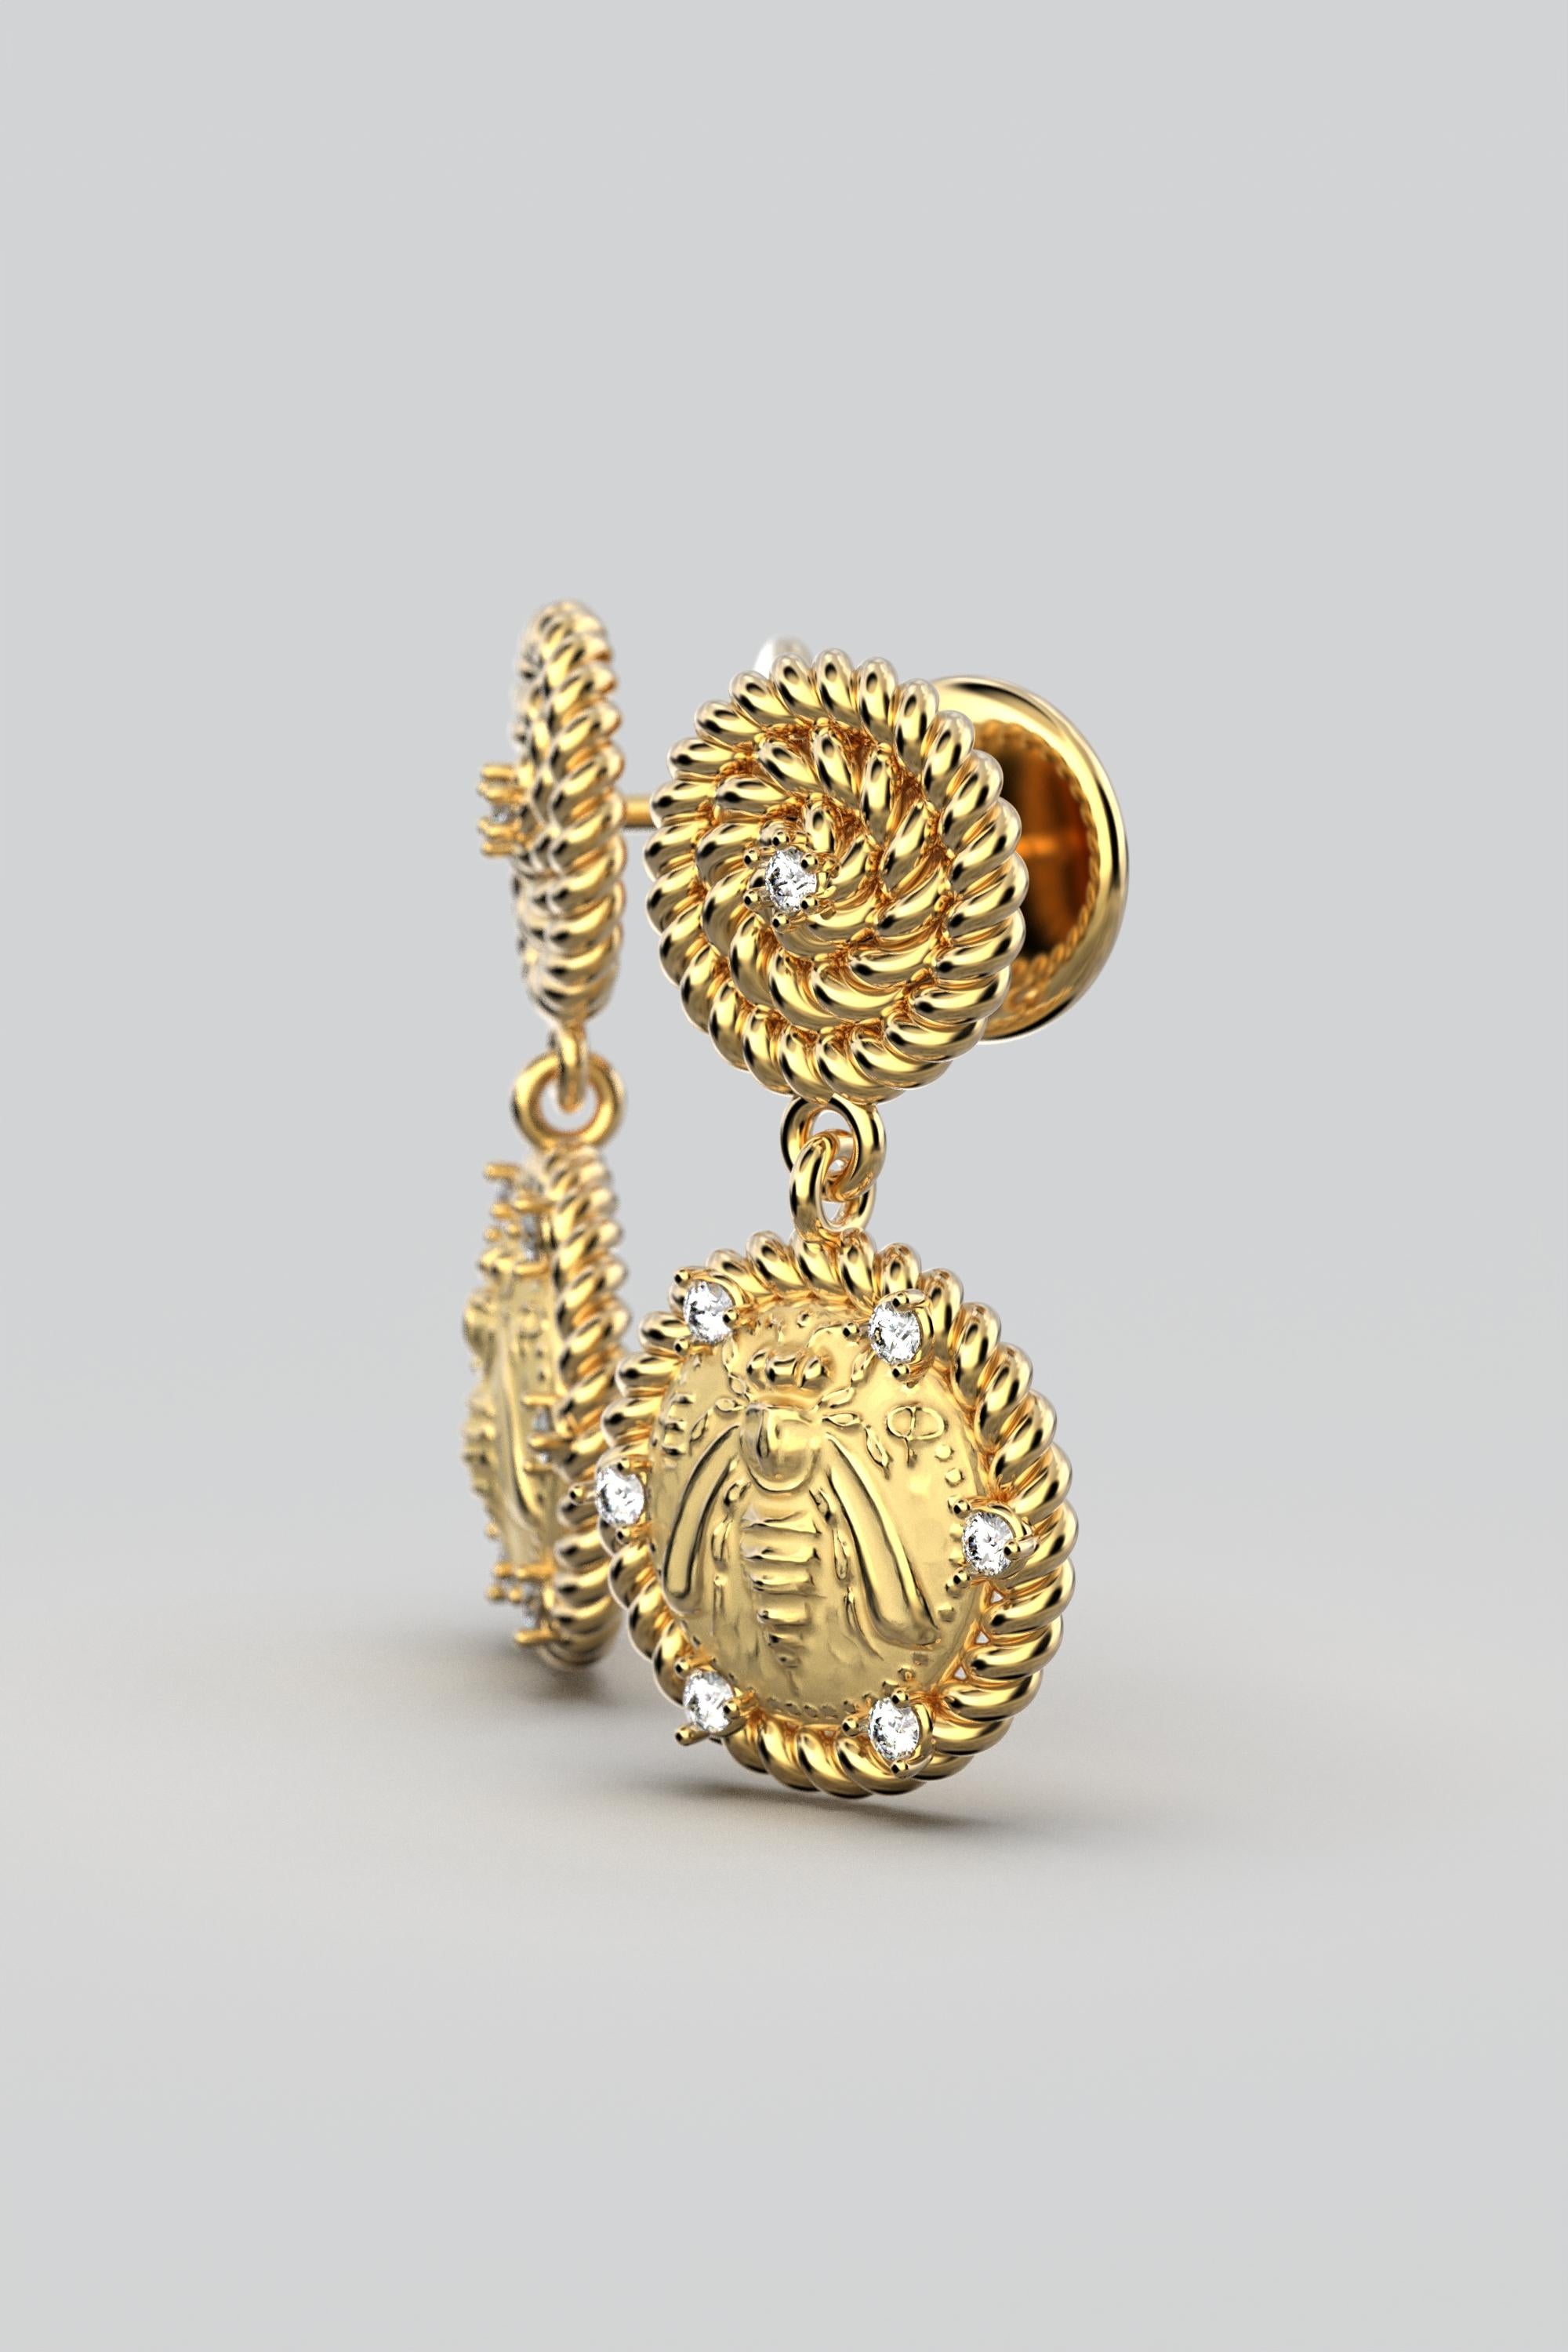 Made to order in 18k Gold and Diamonds.
Adorn yourself with Italian perfection—Diamond Dangle Earrings in 14k or 18k solid gold, inspired by Ancient Greek style. Crafted in Italy, these exquisite Bee Coin Earrings fuse history with modern elegance.